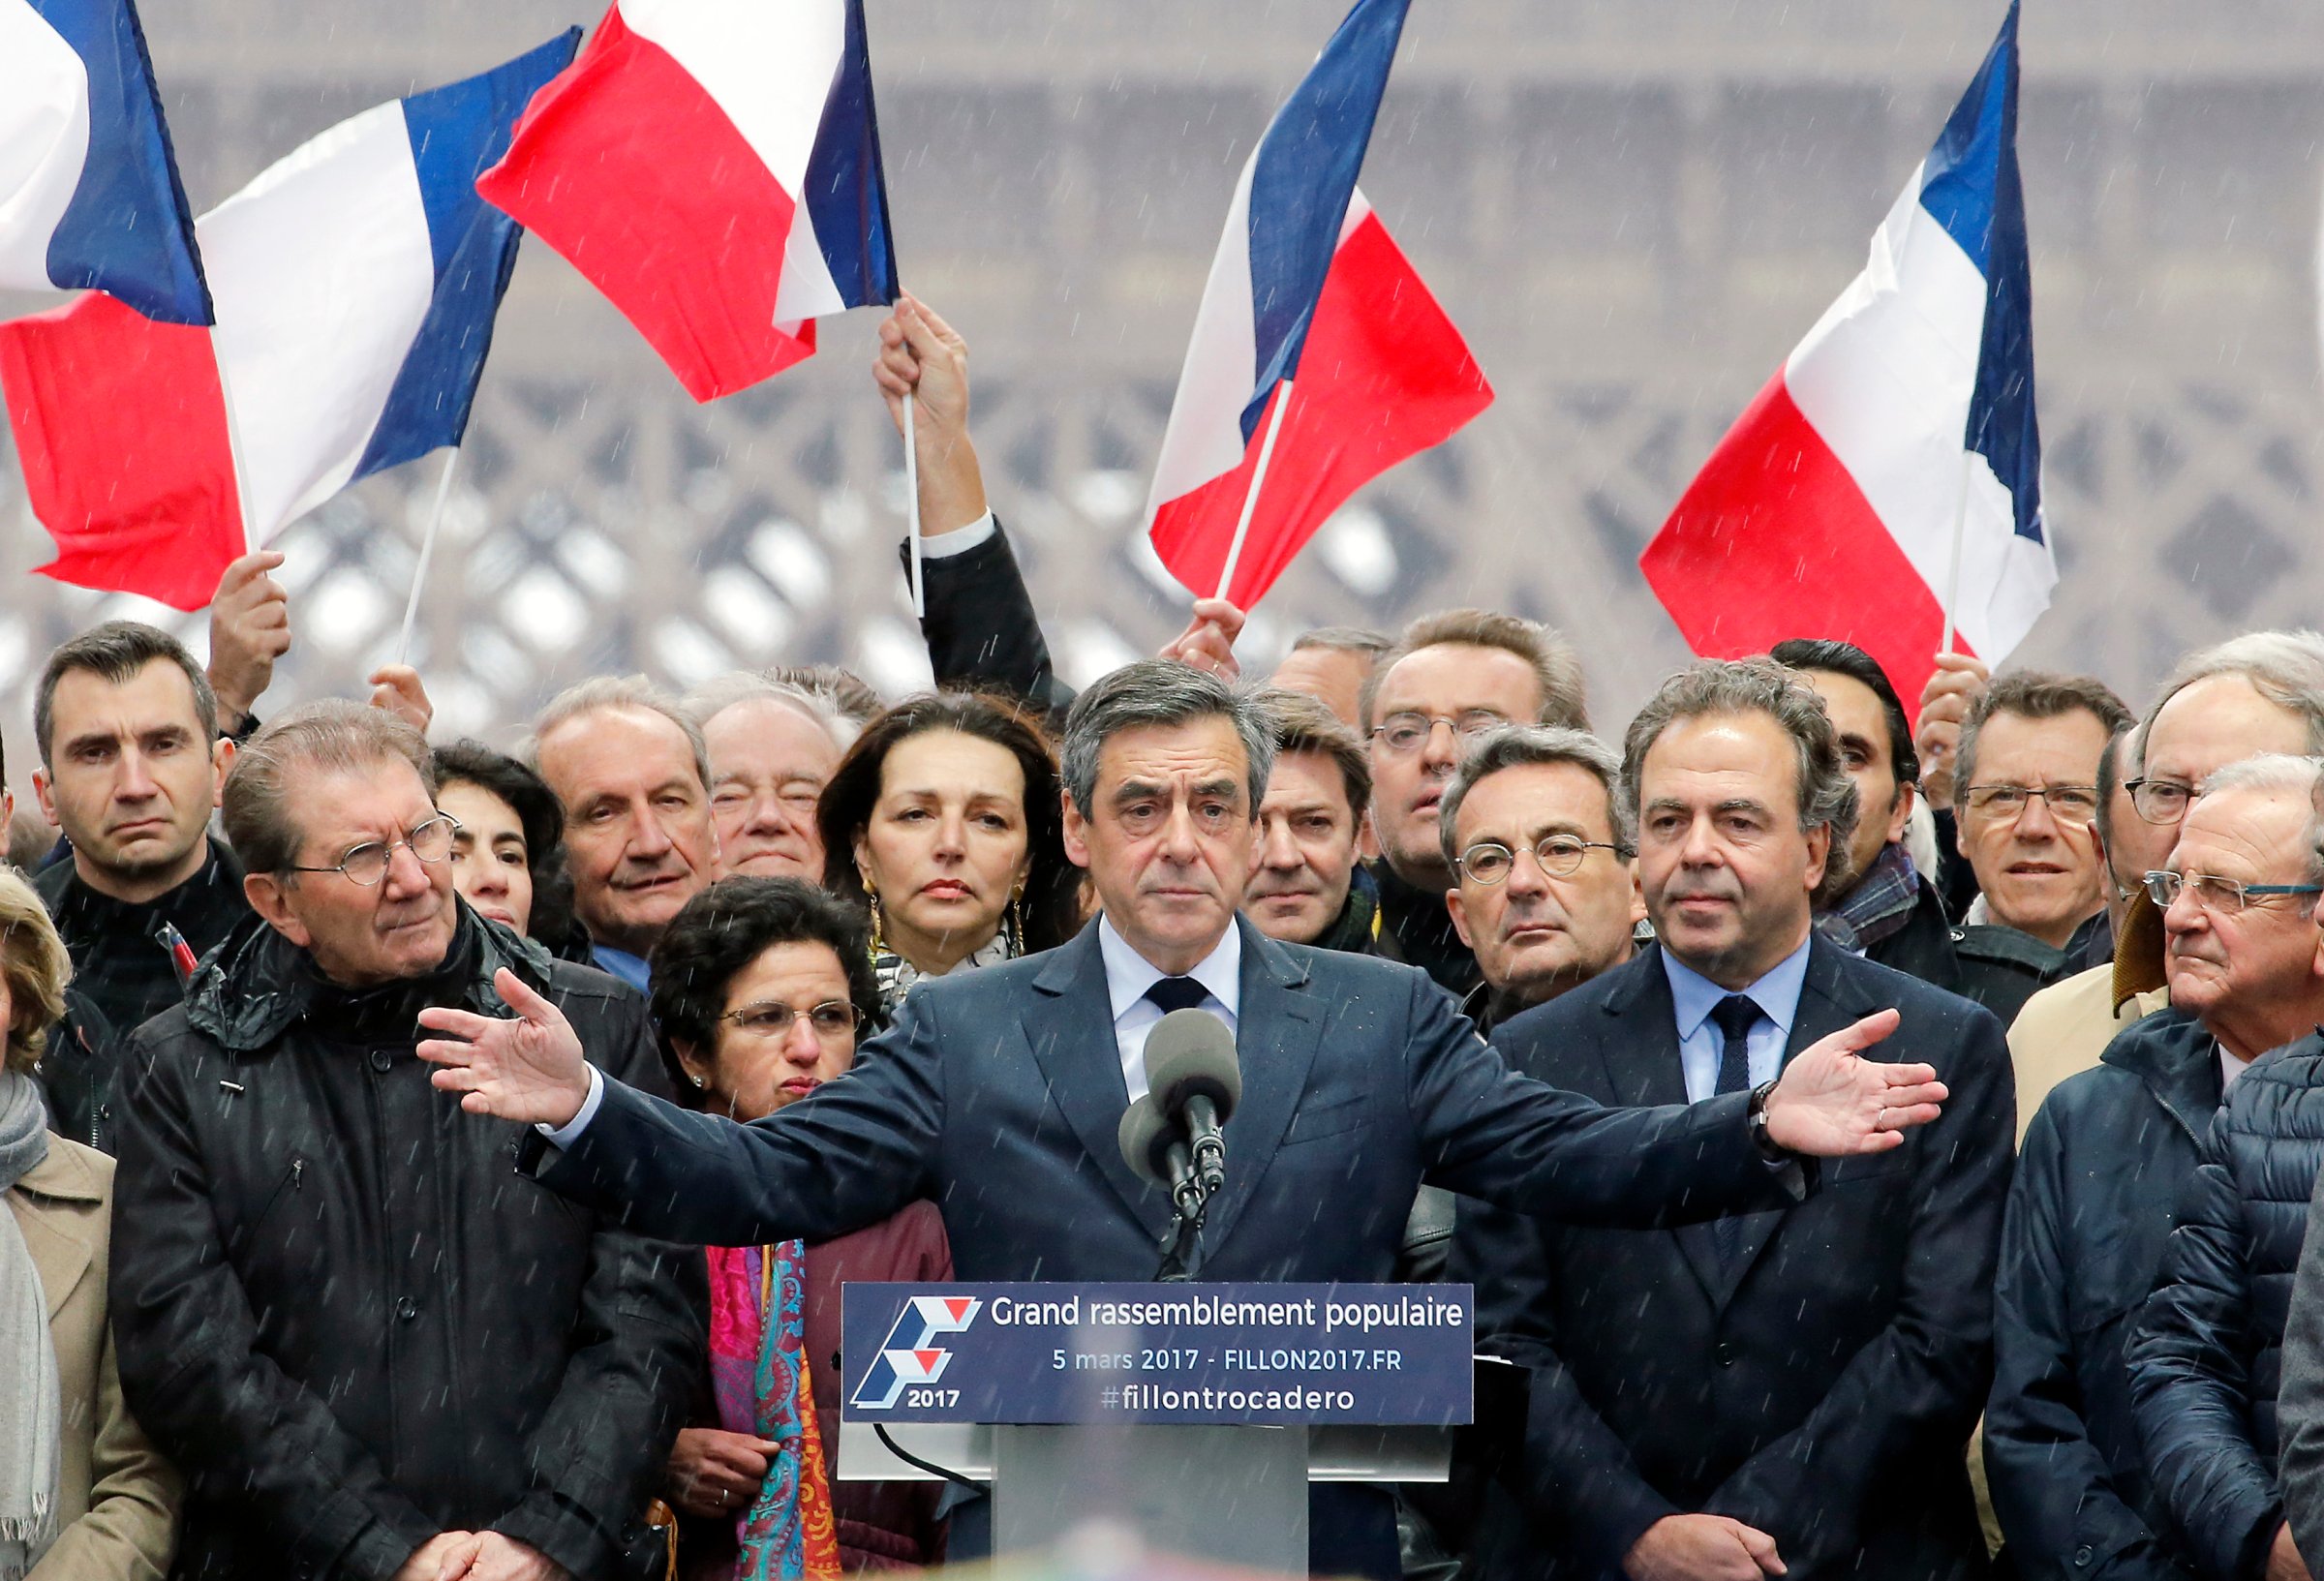 Former French Prime Minister And Candidate For French Presidential Elections Francois Fillon Holds A Rally Campaign In Paris